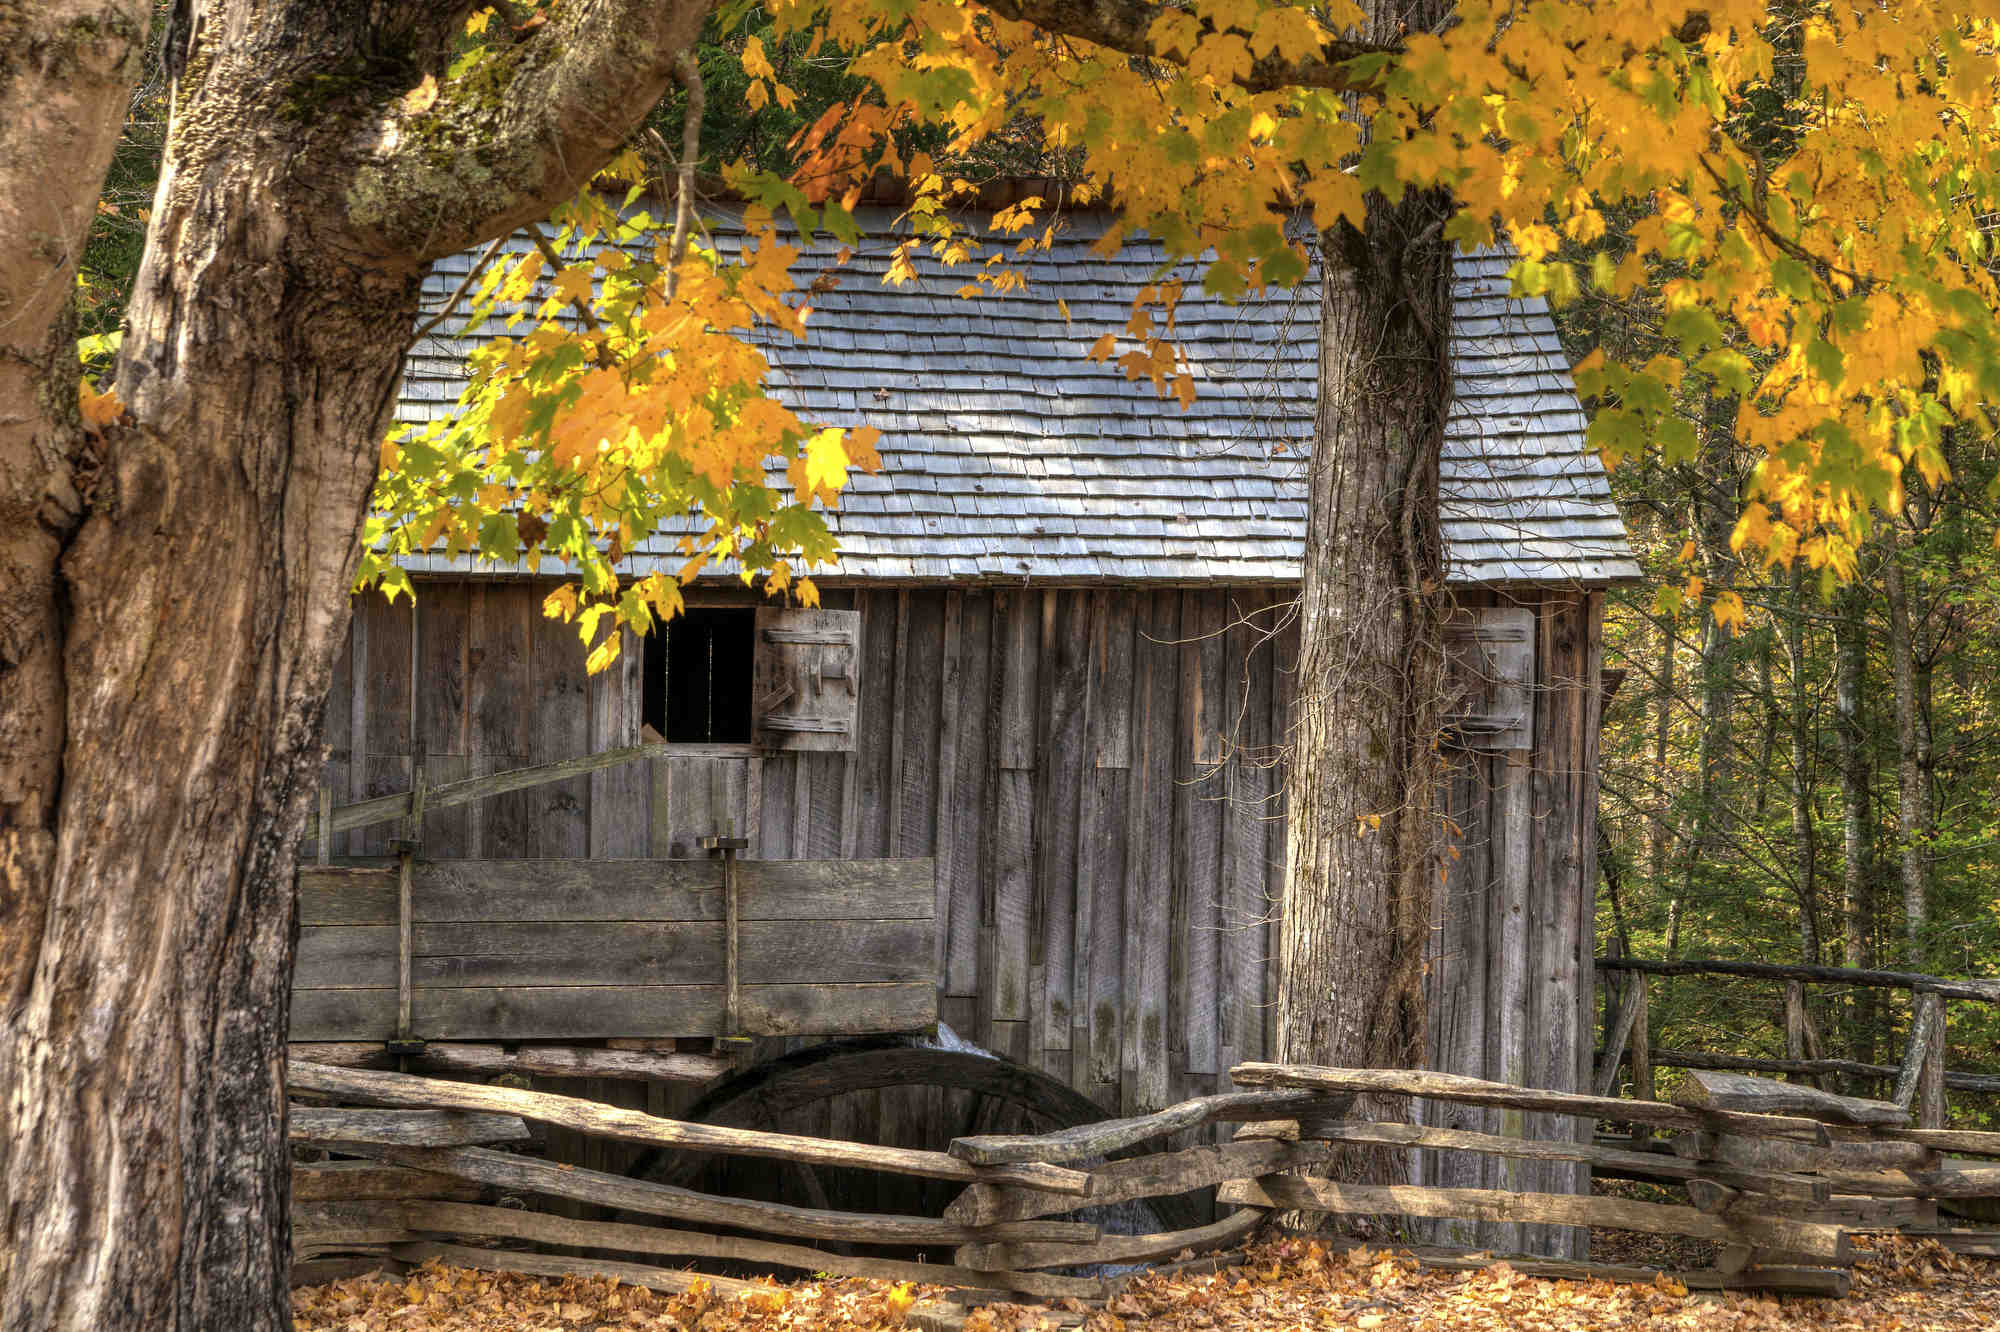 Vibrant yellow leaves surround the age-worn Cable Mill in Cades Cove in Great Smoky Mountains National Park.